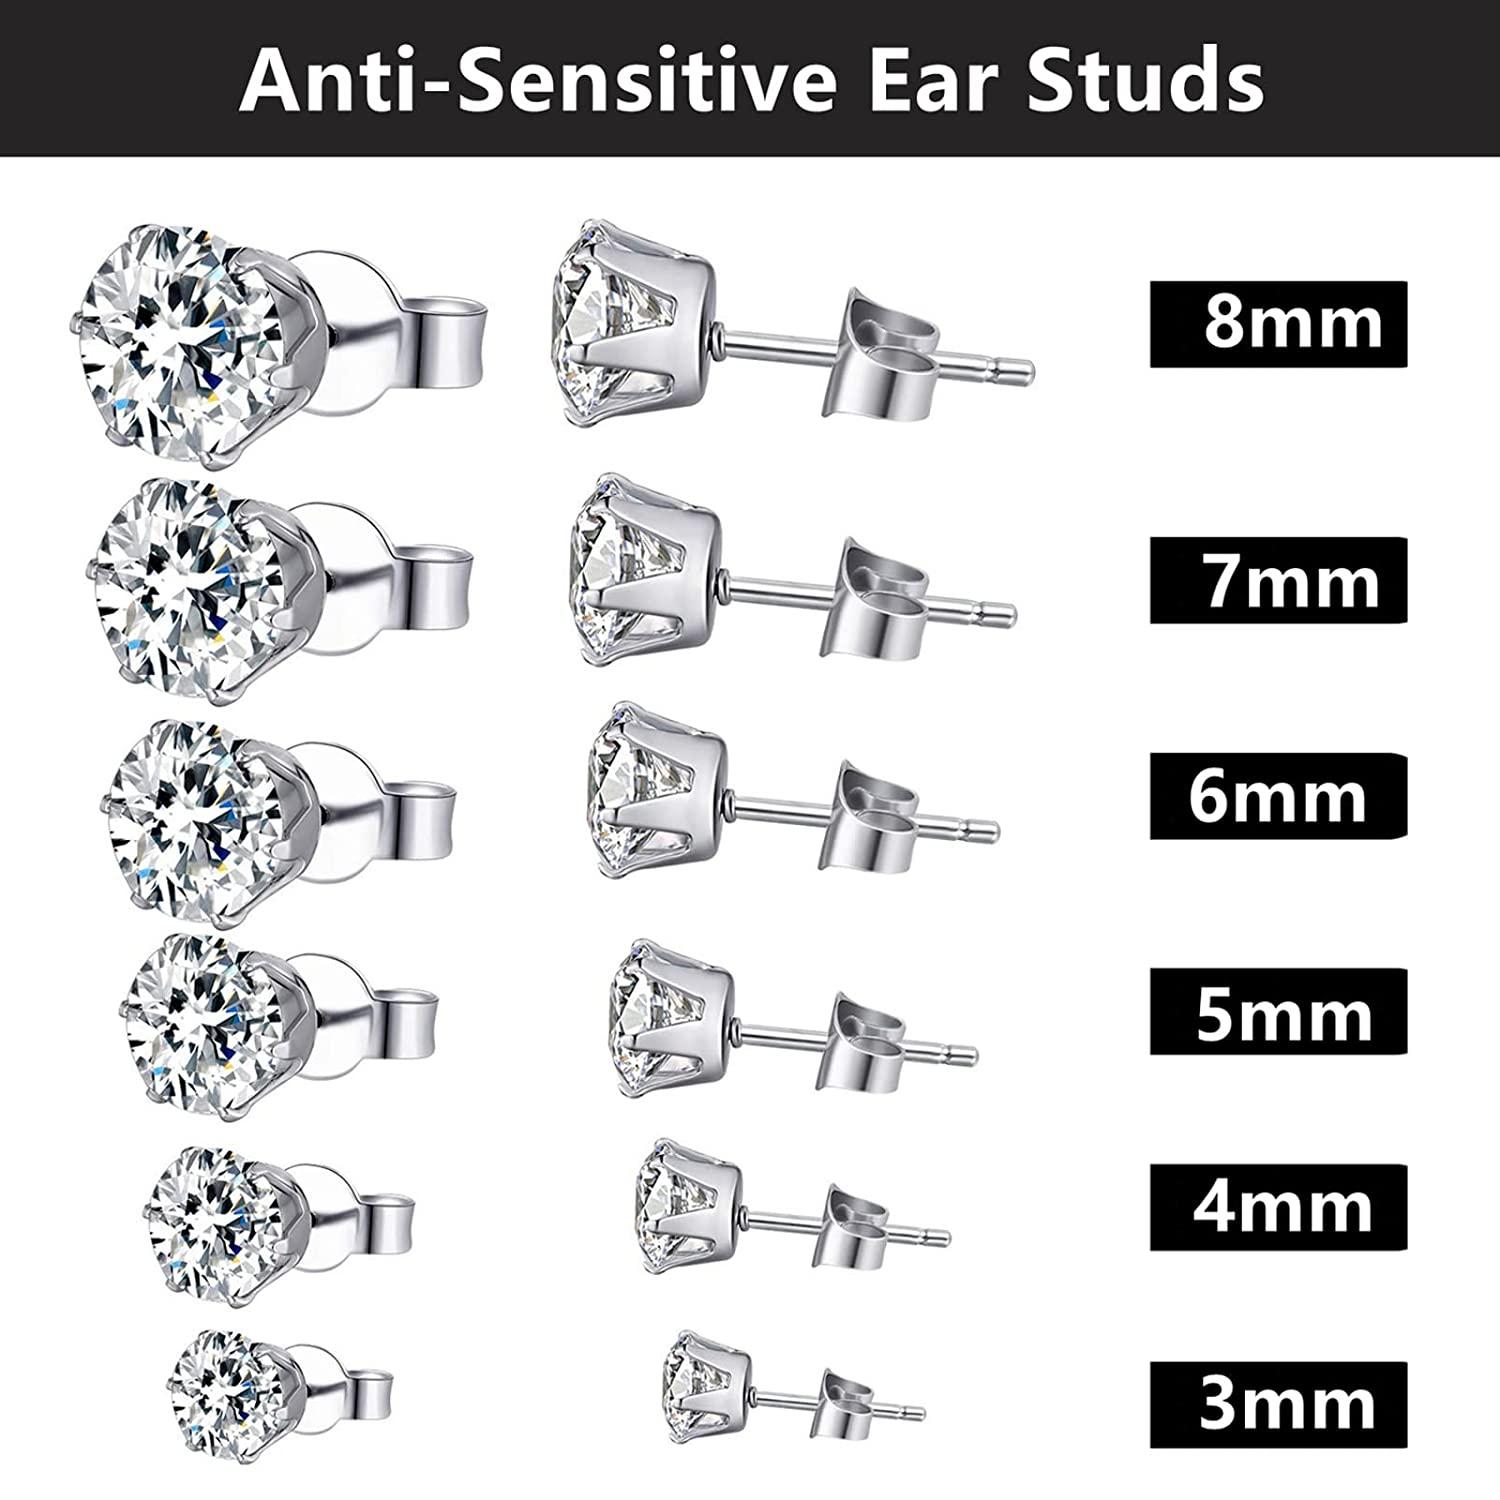 HYJLPAF Safety Ear Piercing Kit – 4 Pack Disposable Self Ear Piercing Gun  with 5mm Silver Earring Studs